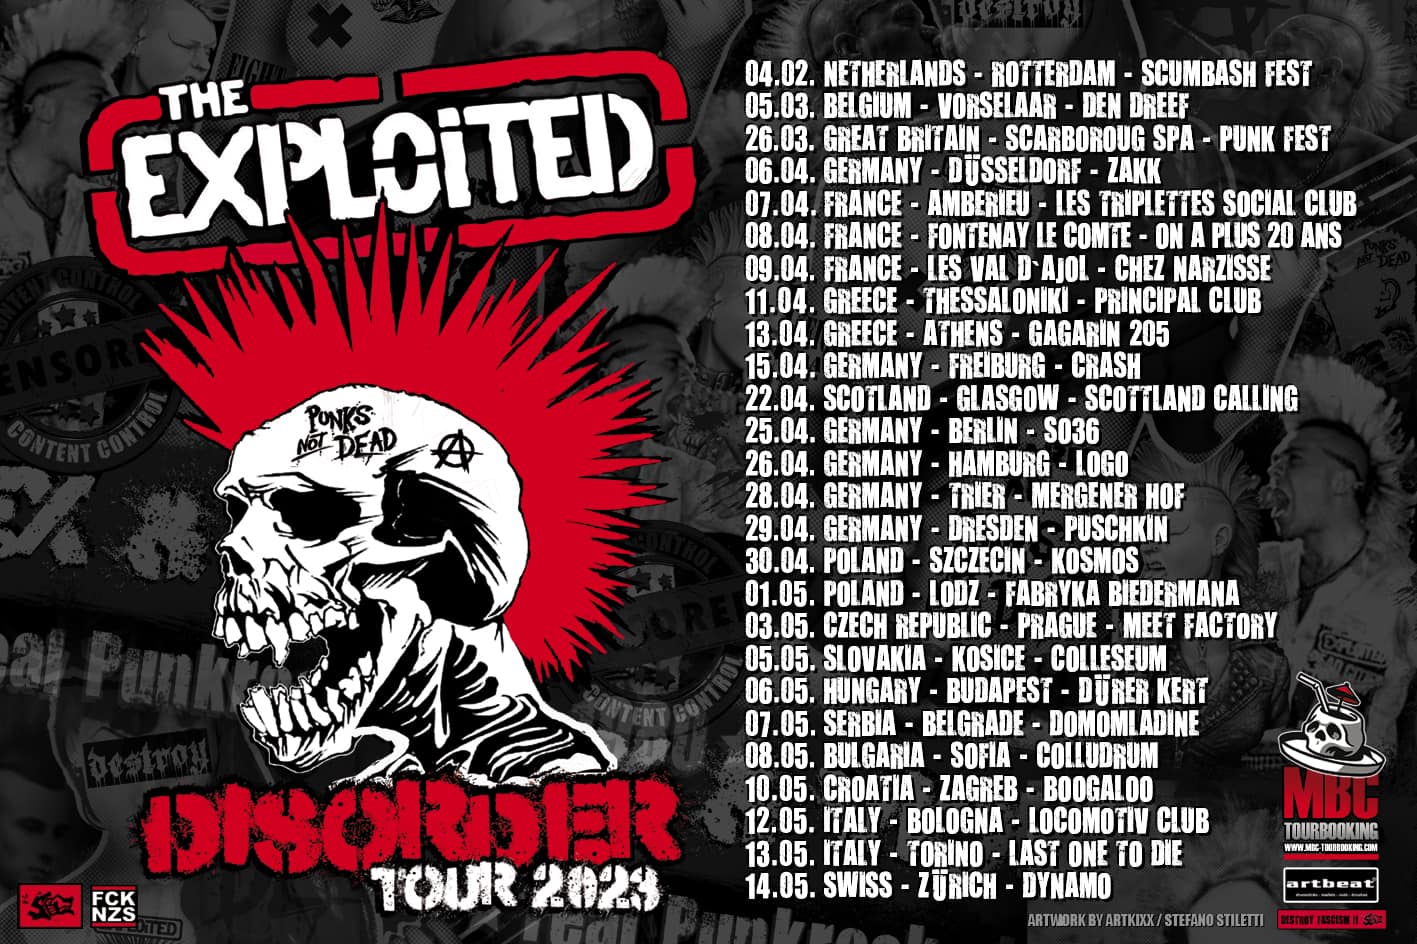 THE EXPLOITED “Disorder“ Tour 2023 Obliveon